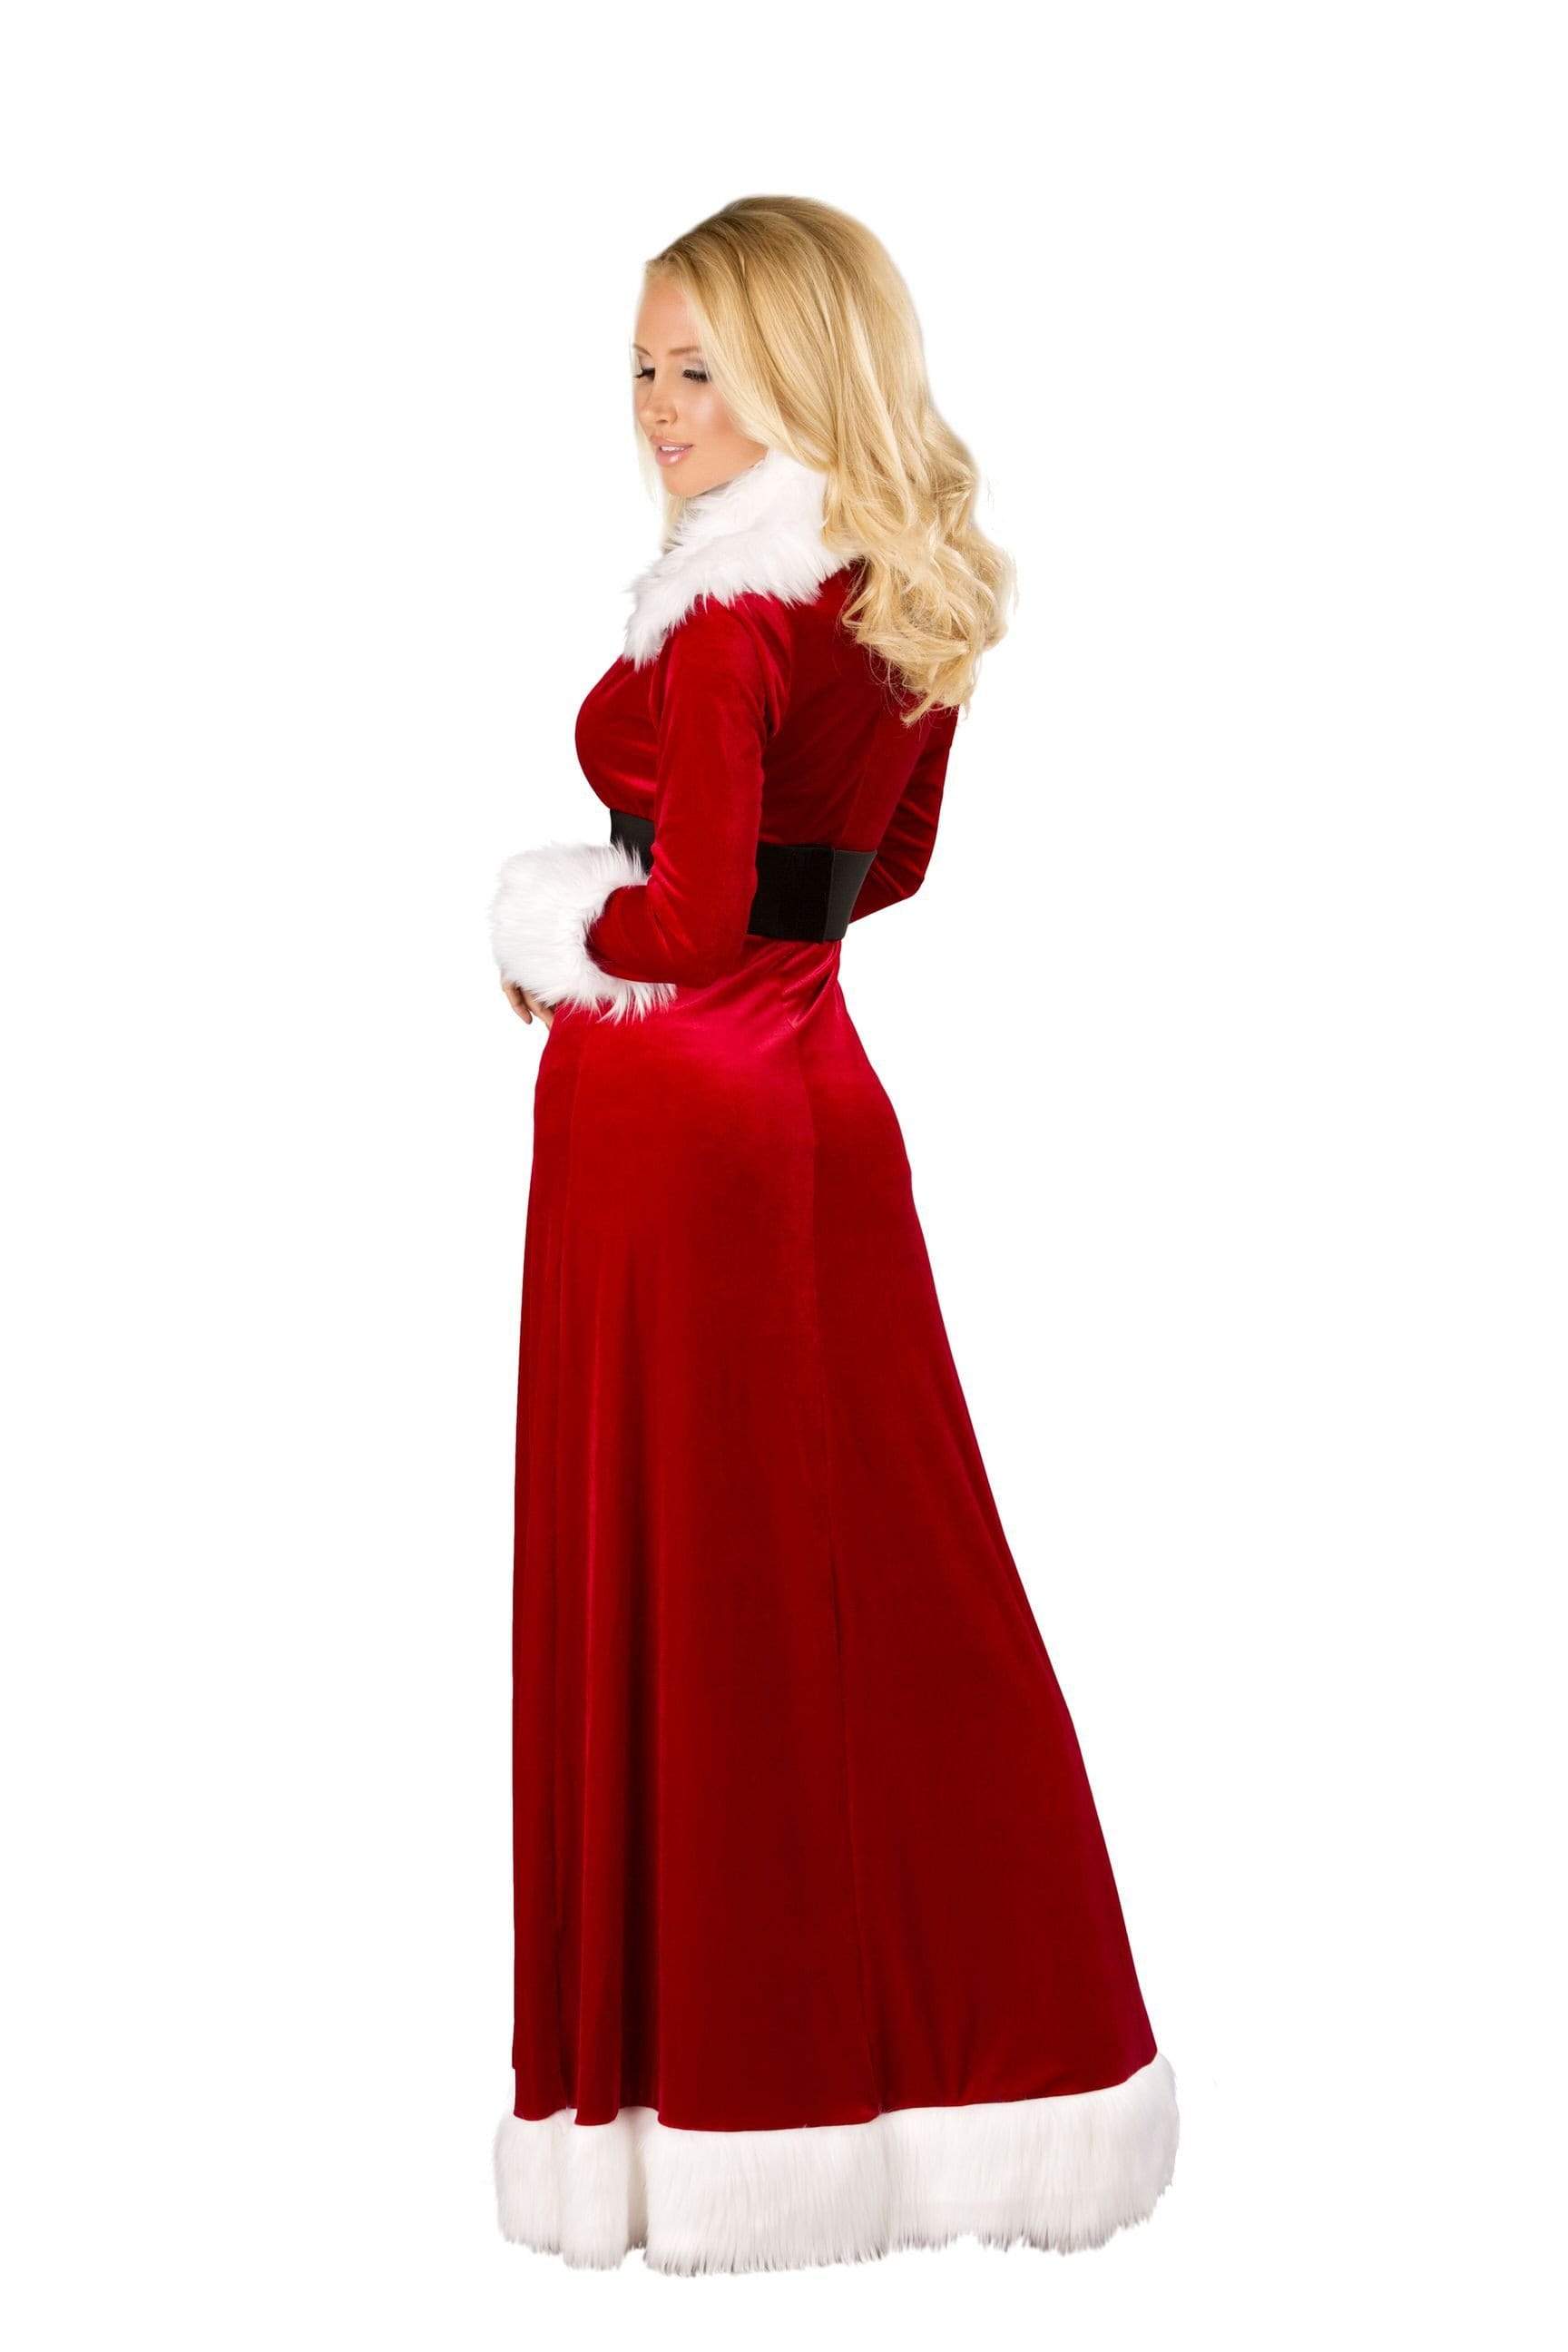 Roma S/M / Red Sexy Miss Claus Red Velvet Fur Trim Robe w/ Boy Short Christmas Set SHC-C170-S/M-R Apparel & Accessories > Costumes & Accessories > Costumes